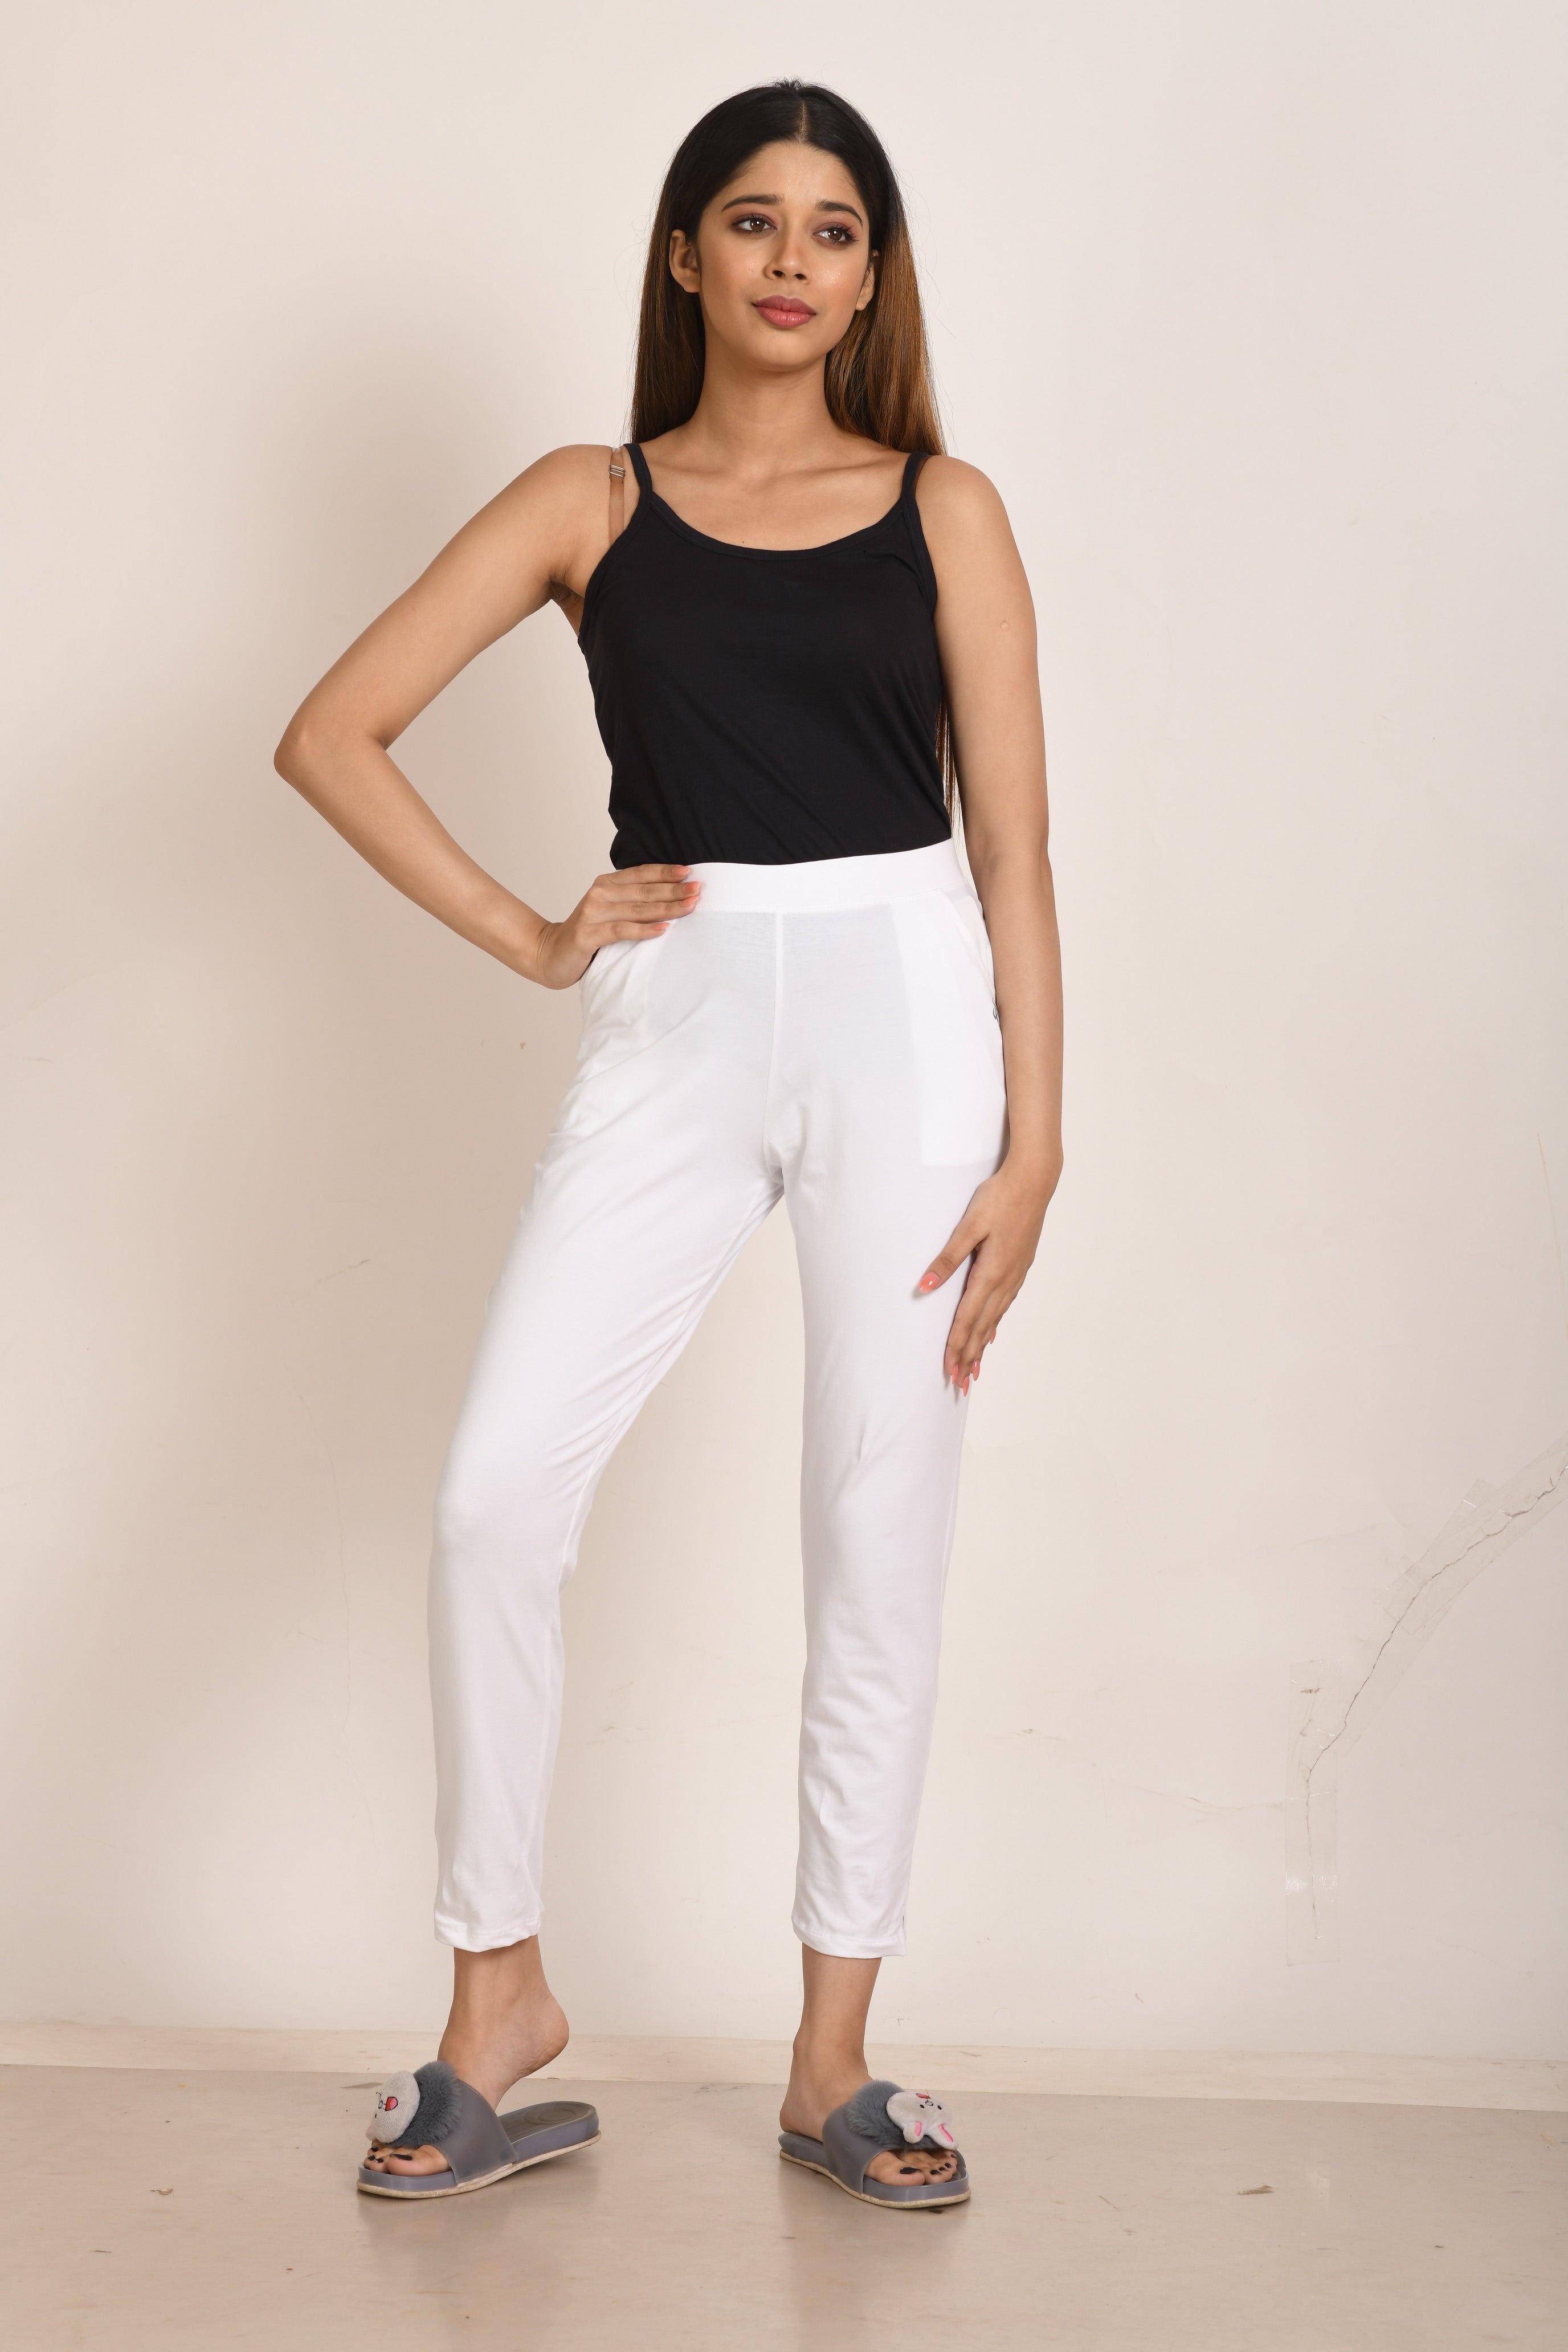 Rich Look Fashion Plain Brown and White Ladies Cigarette Pants at Rs  200/piece in Delhi